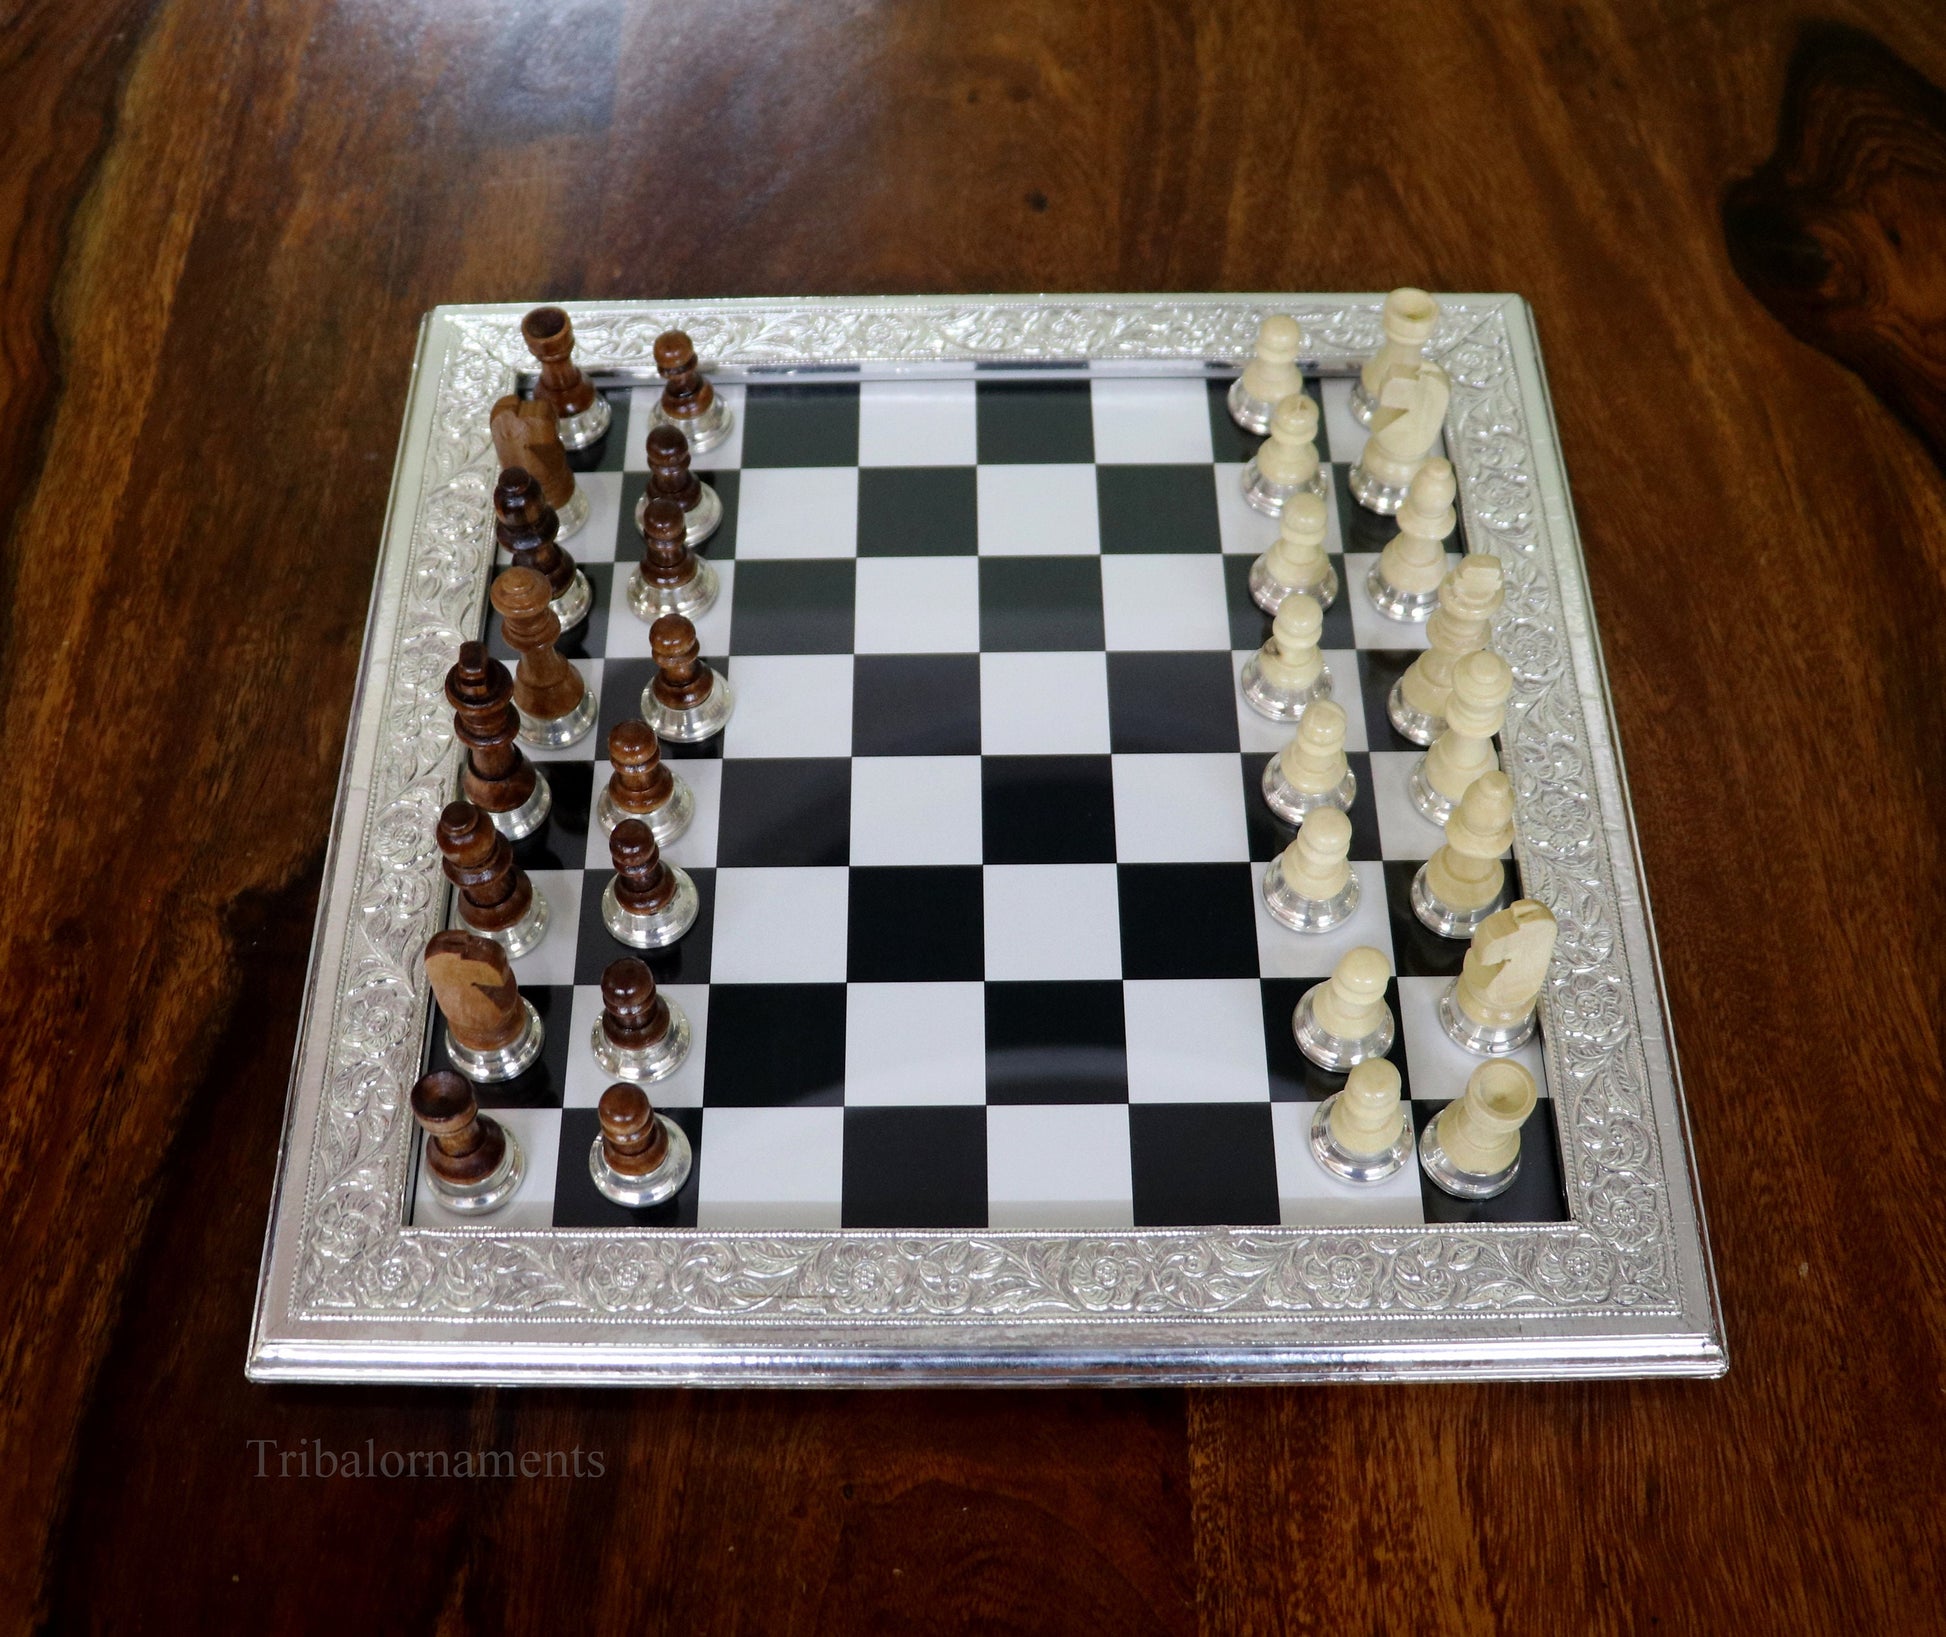 925 sterling silver work chessboard, Amazing customized handcrafted design on wooden base, fabulous Royal silver article from india fr04 - TRIBAL ORNAMENTS